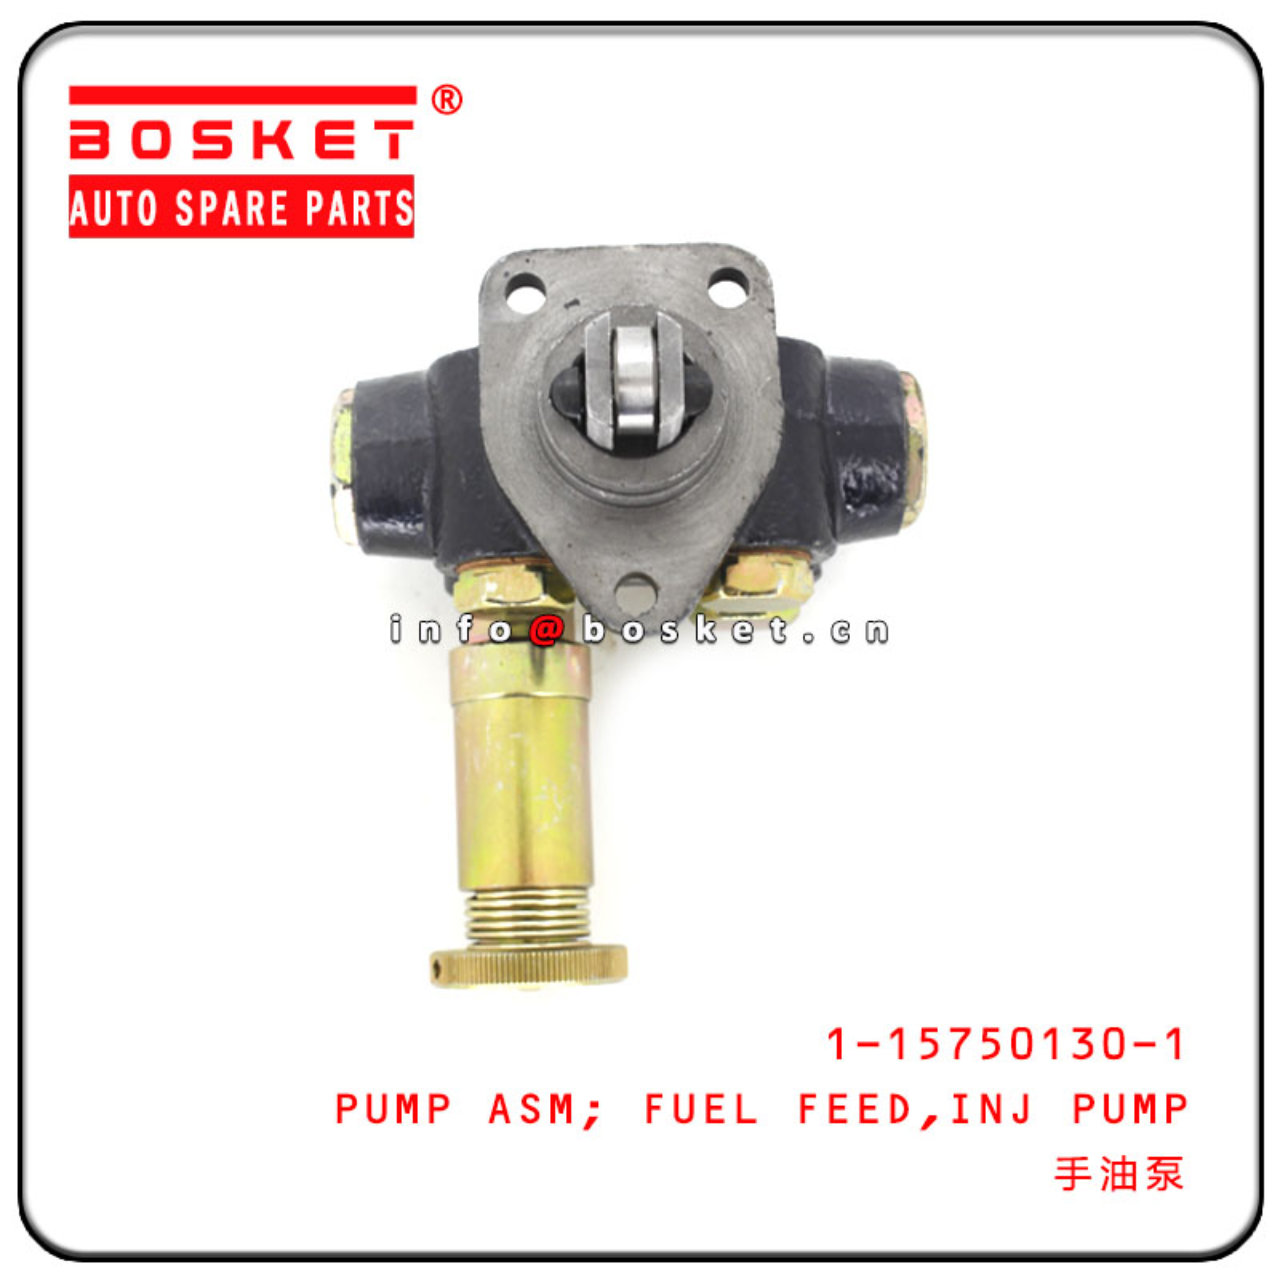 1-15750130-1 1157501301 Injection Pump Fuel Feed Pump Assembly Suitable For ISUZU 6HK1 CXZ